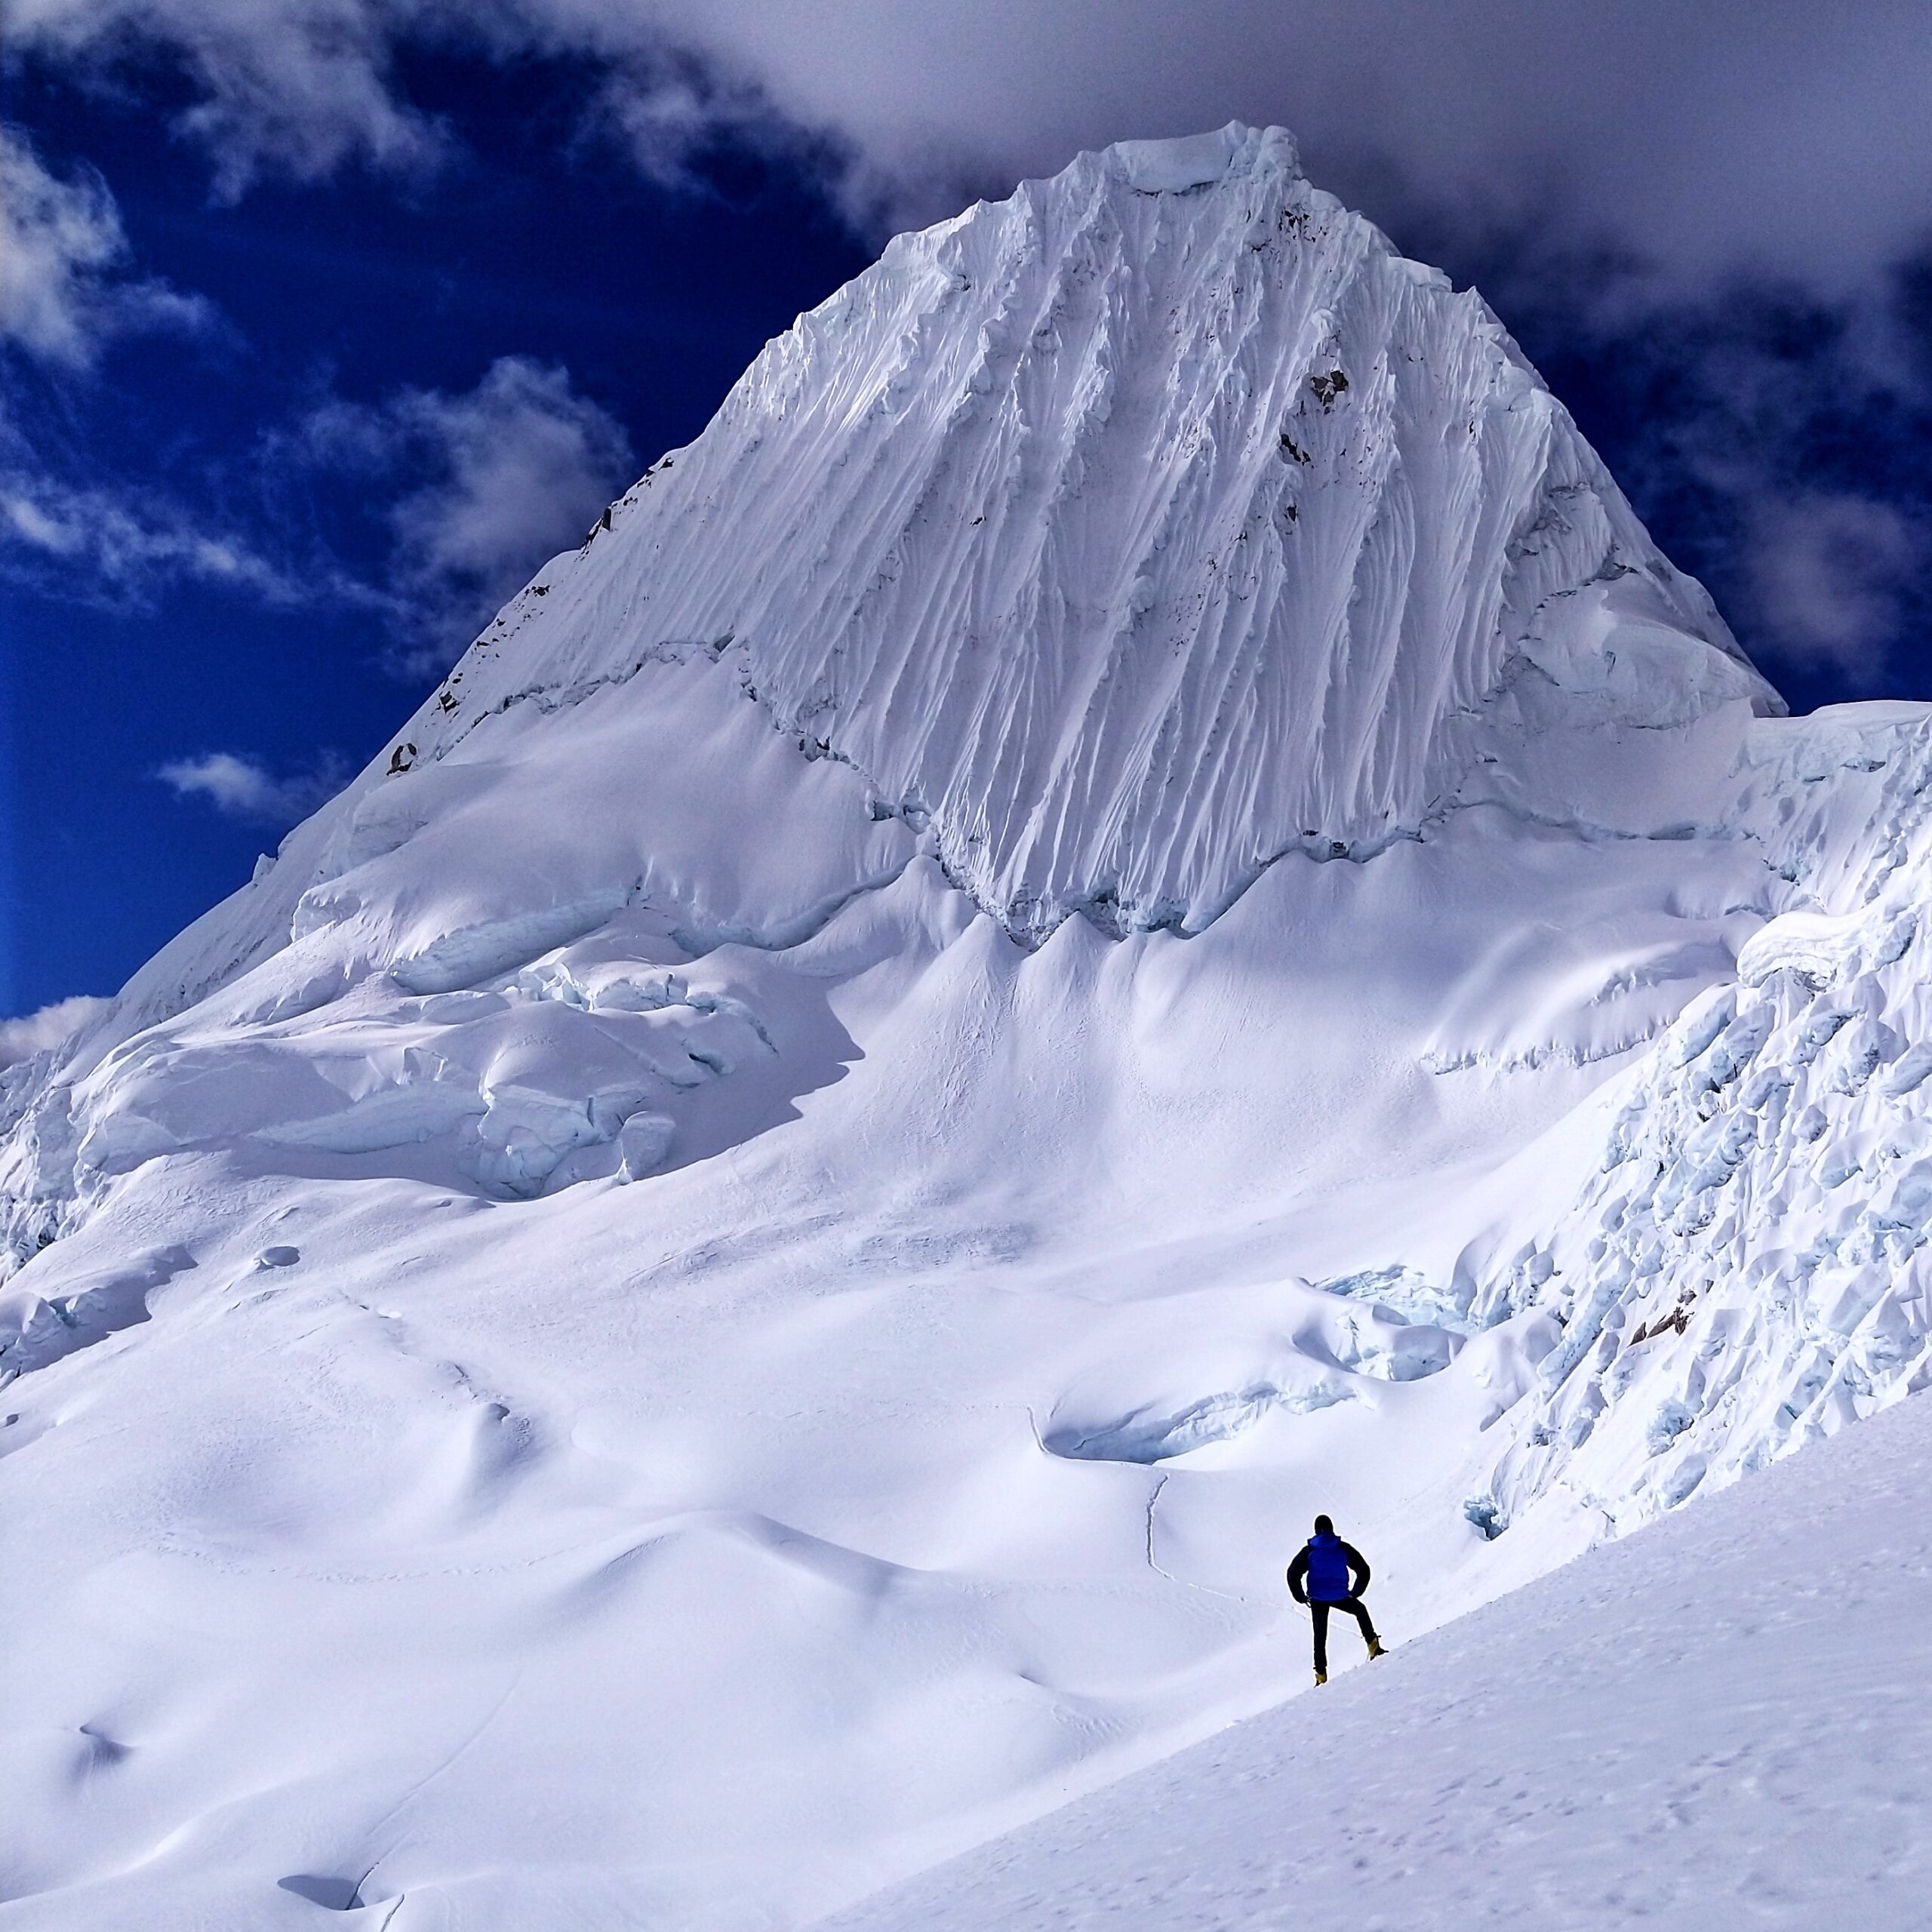 Trekking and Alpine climbing in the Andes